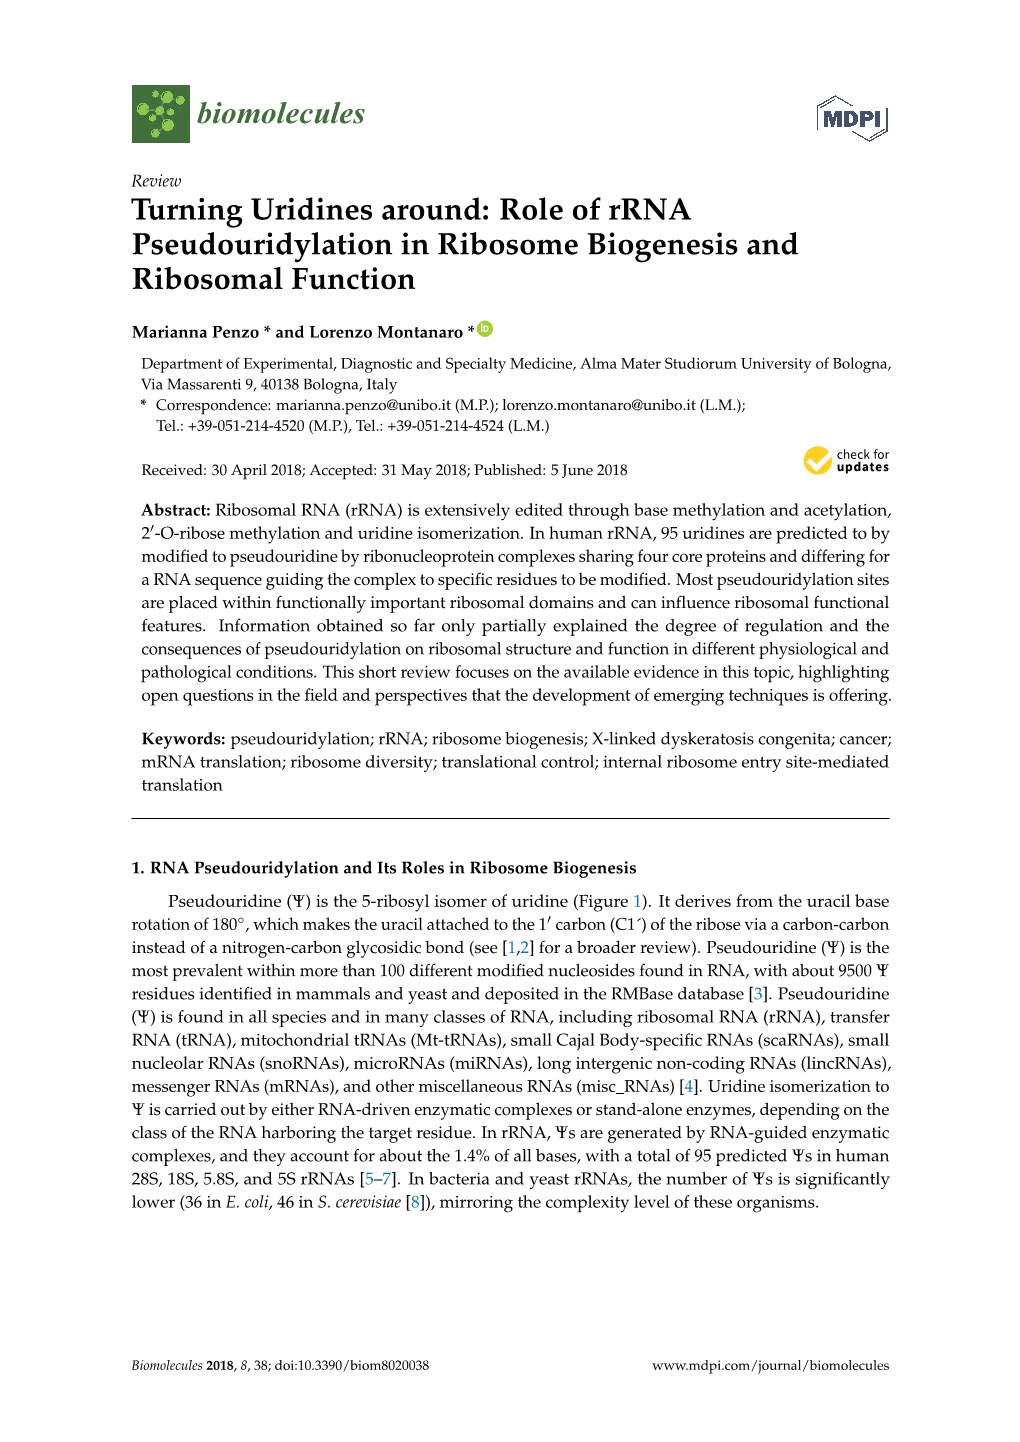 Role of Rrna Pseudouridylation in Ribosome Biogenesis and Ribosomal Function